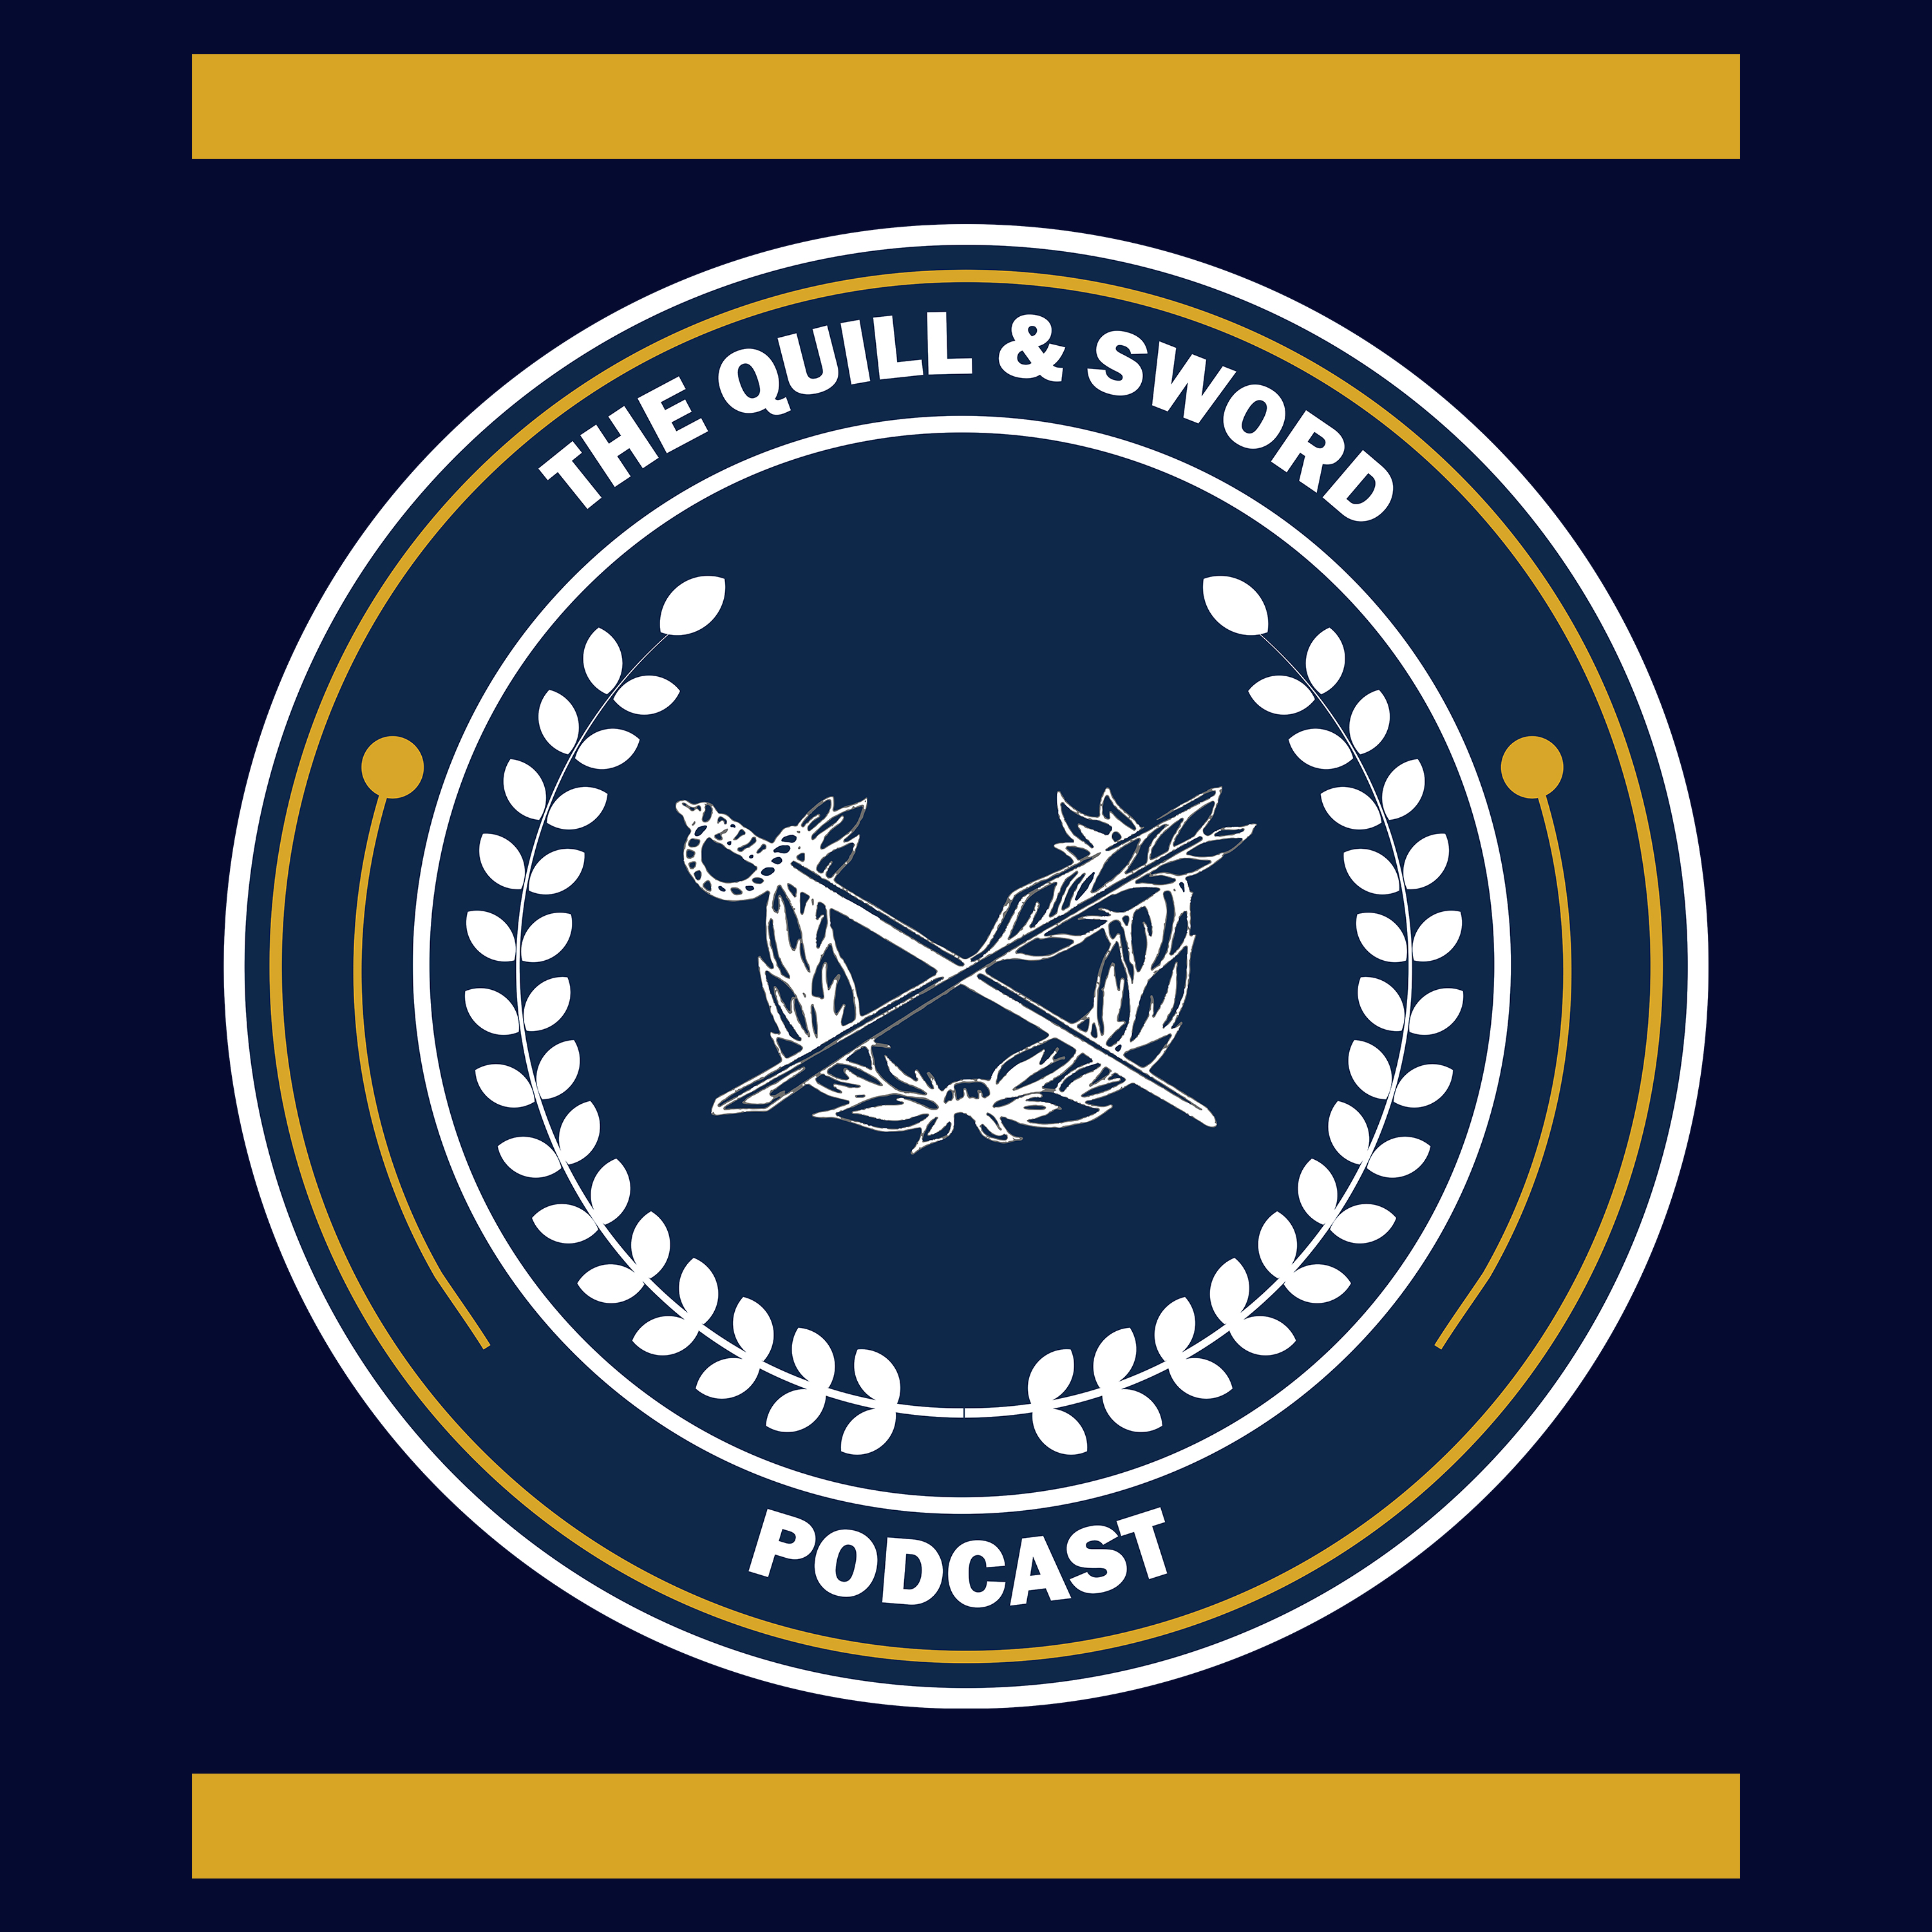 The Quill & Sword Podcast logo